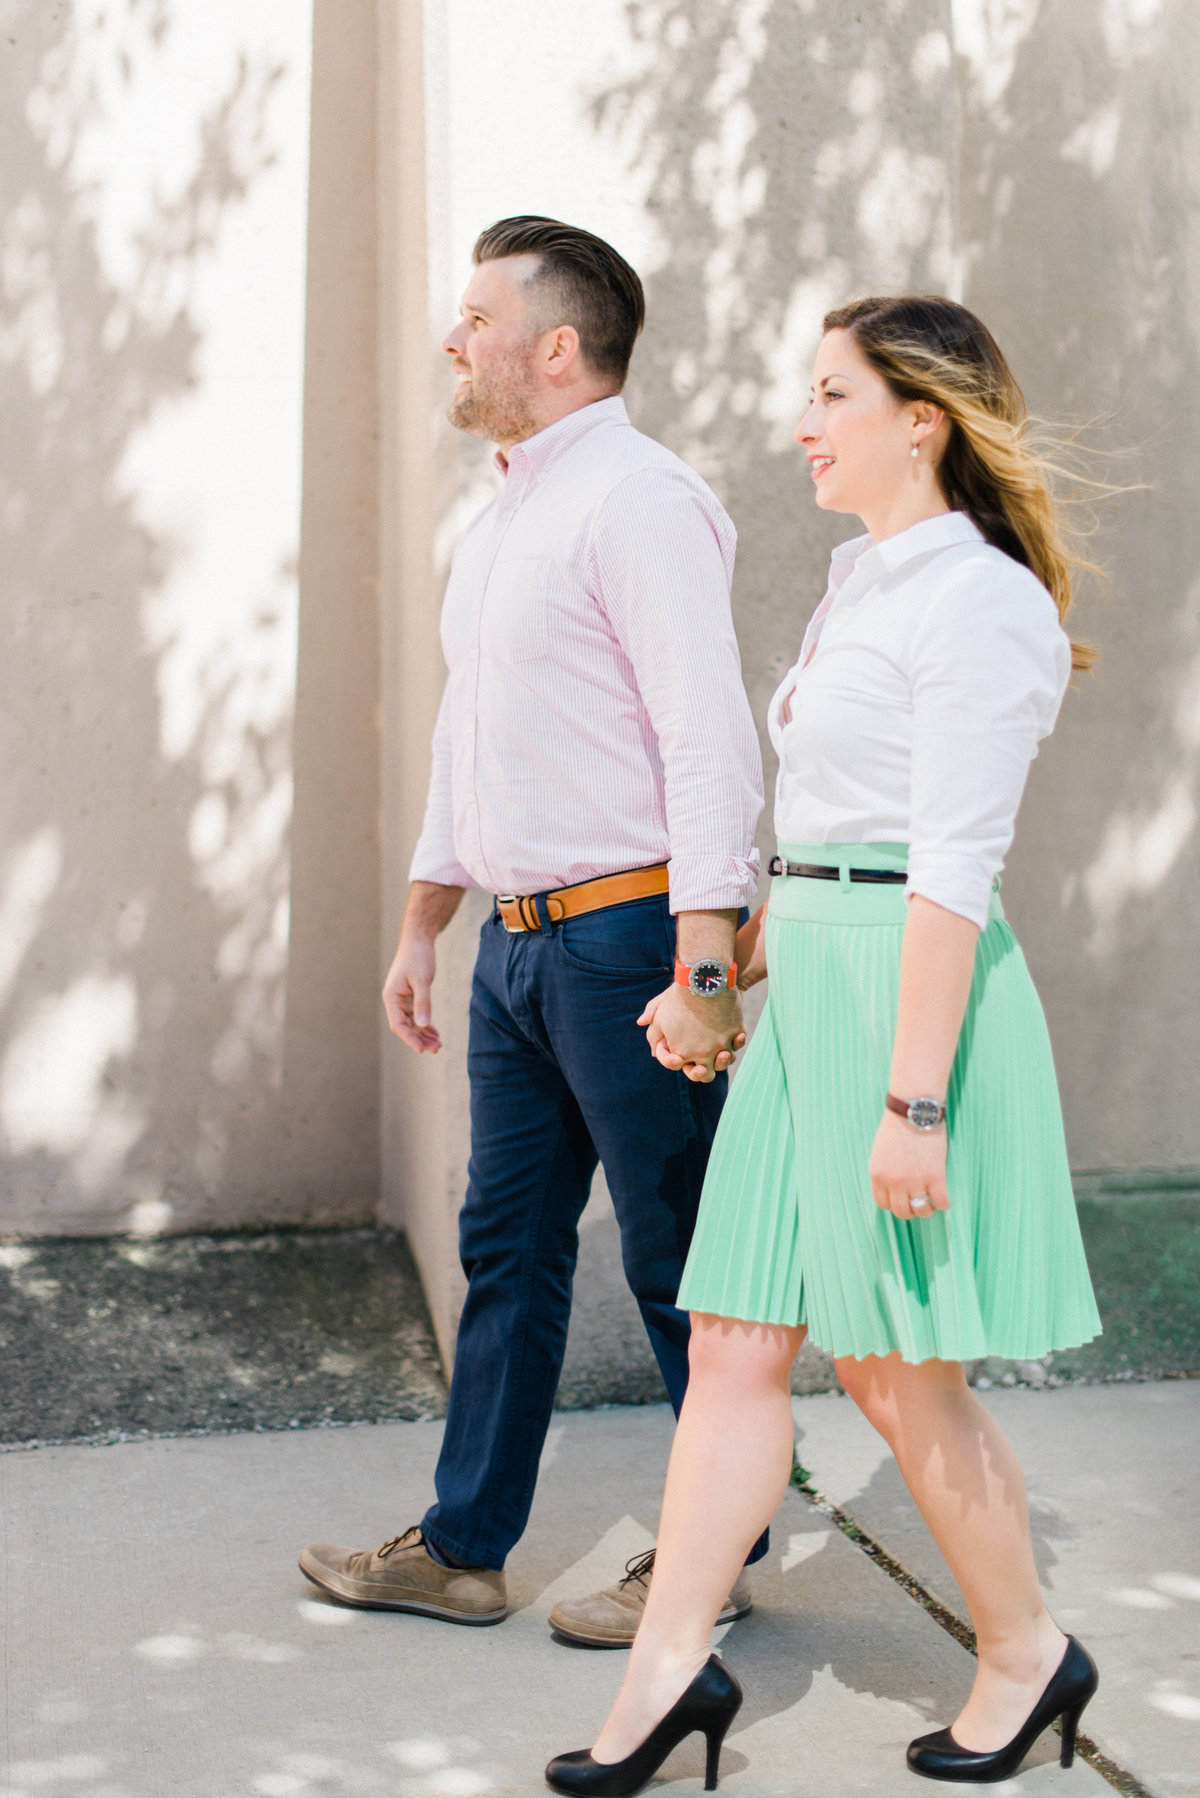 Giadore Photography- Shelly & Steve Engagement-4